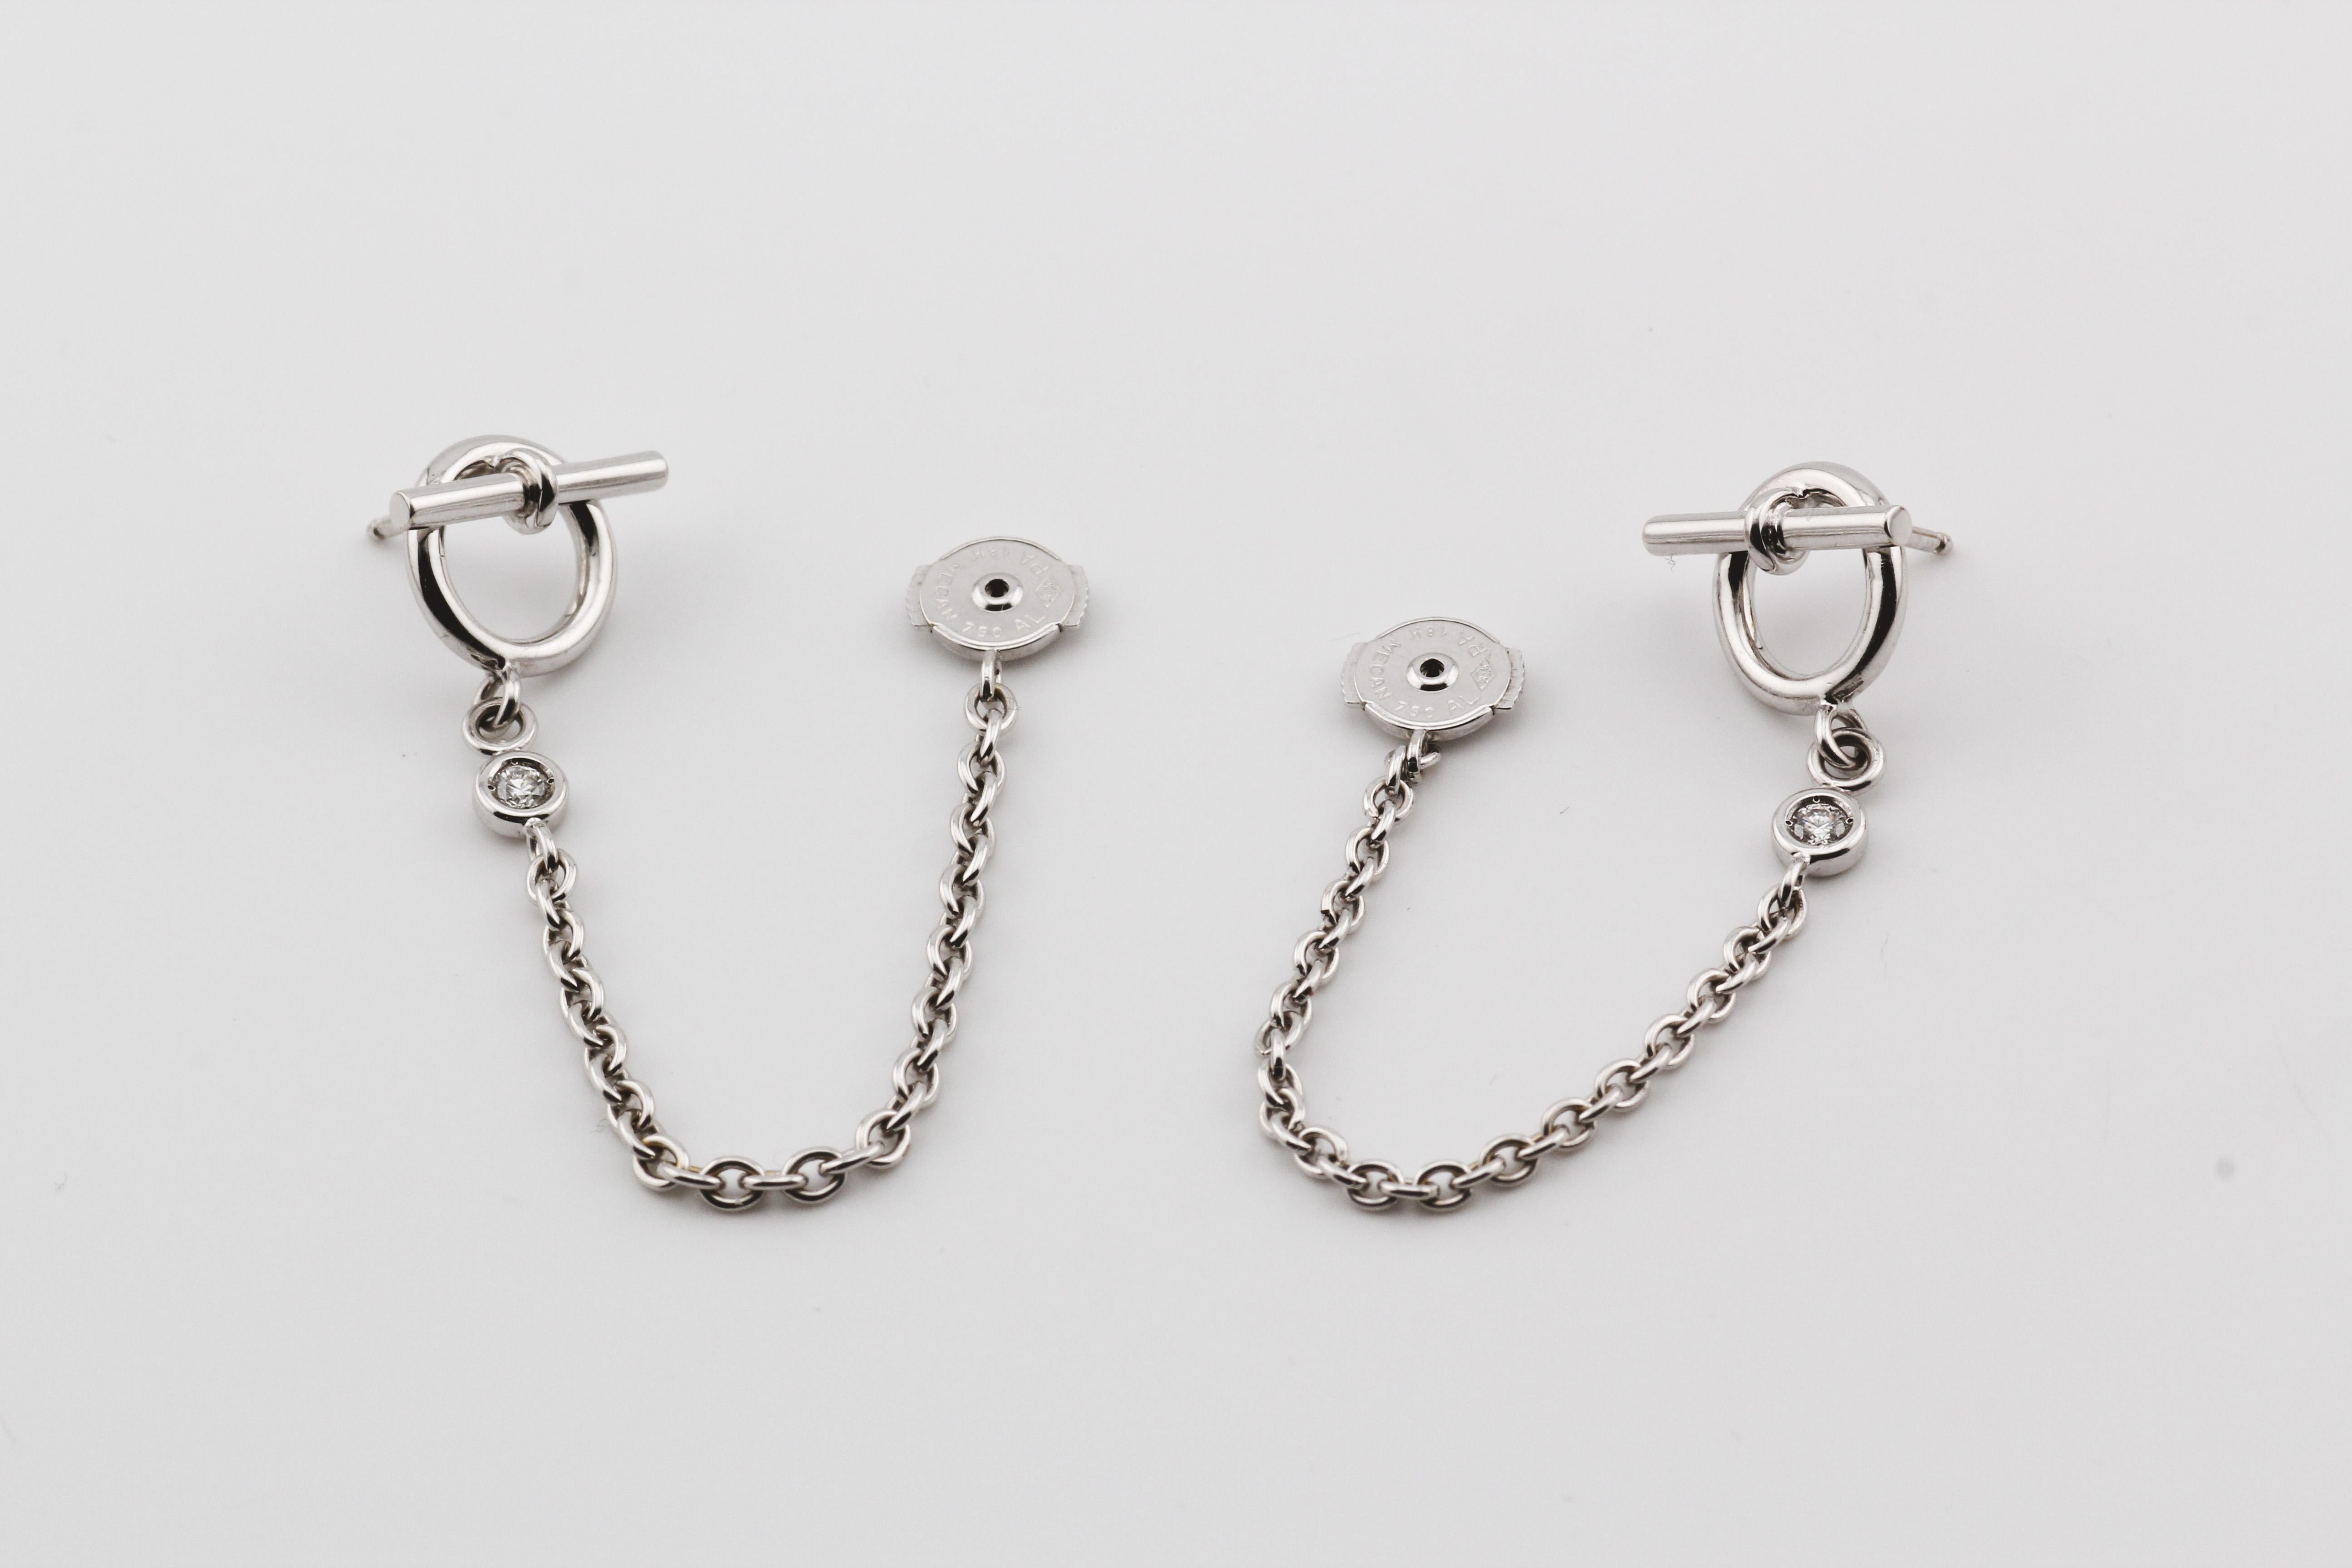 Introducing the Hermes Diamond 18K White Gold Dangling Toggle Stud Earrings—a sublime fusion of sophistication and modern allure. Crafted by the esteemed French luxury house, Hermes, these earrings showcase a harmonious combination of 18K white gold